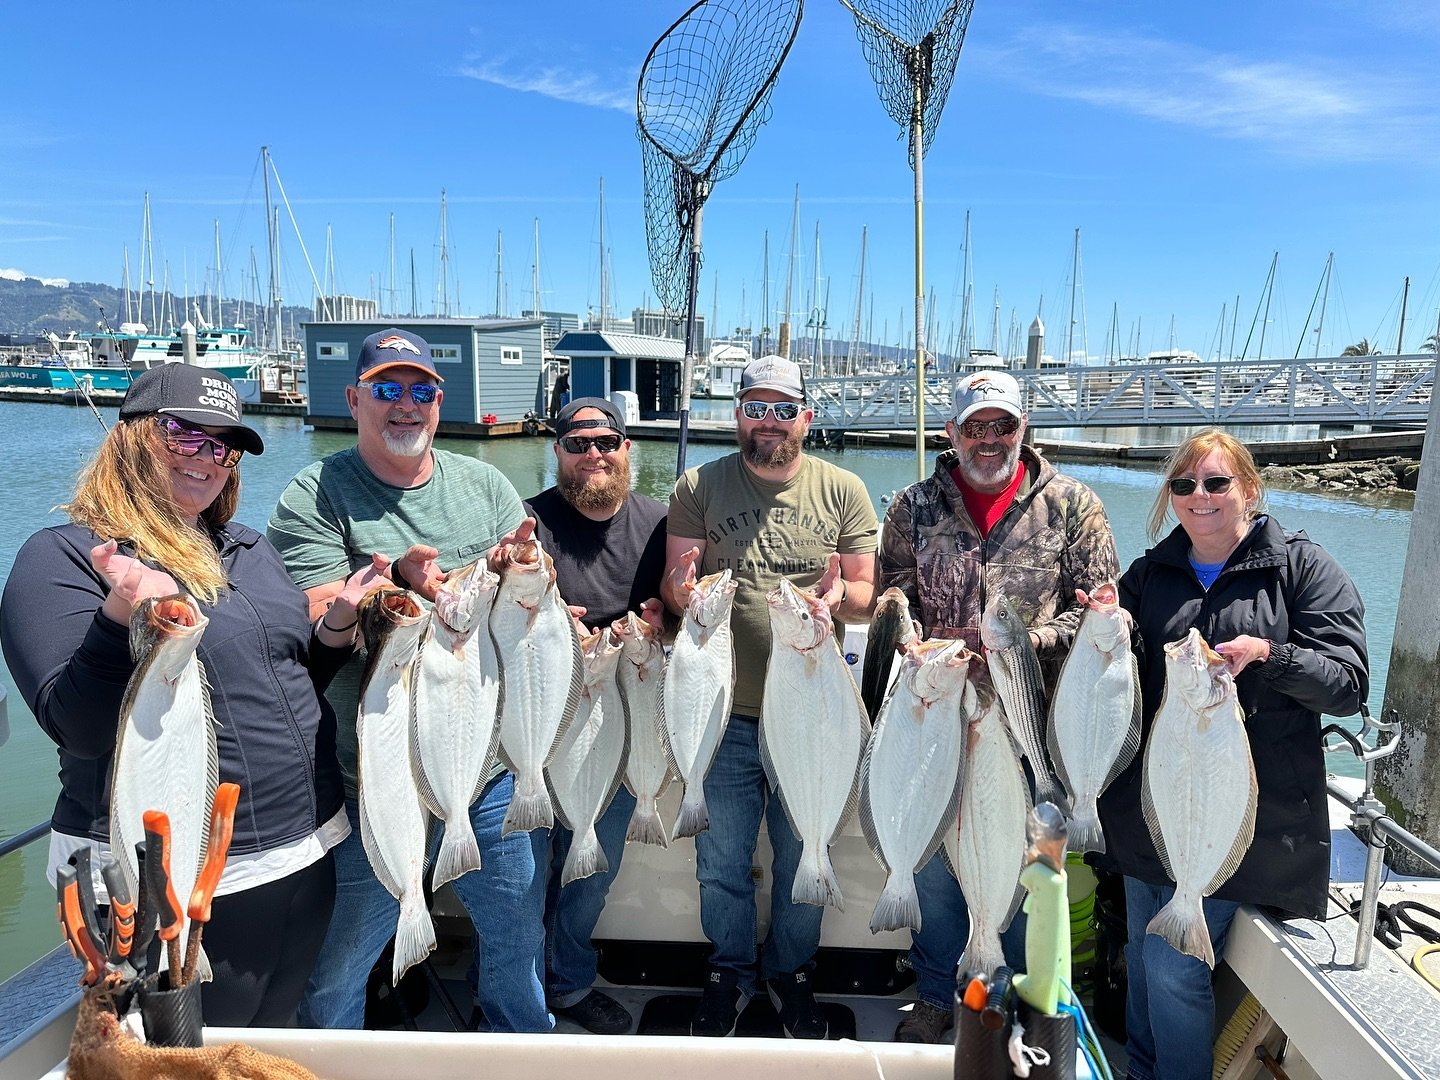 Limits by noon today we have 3 spots open tomorrow who wants to come! #Goldenstateguideservice #scallywag #fishemeryville #fishing #sfbay